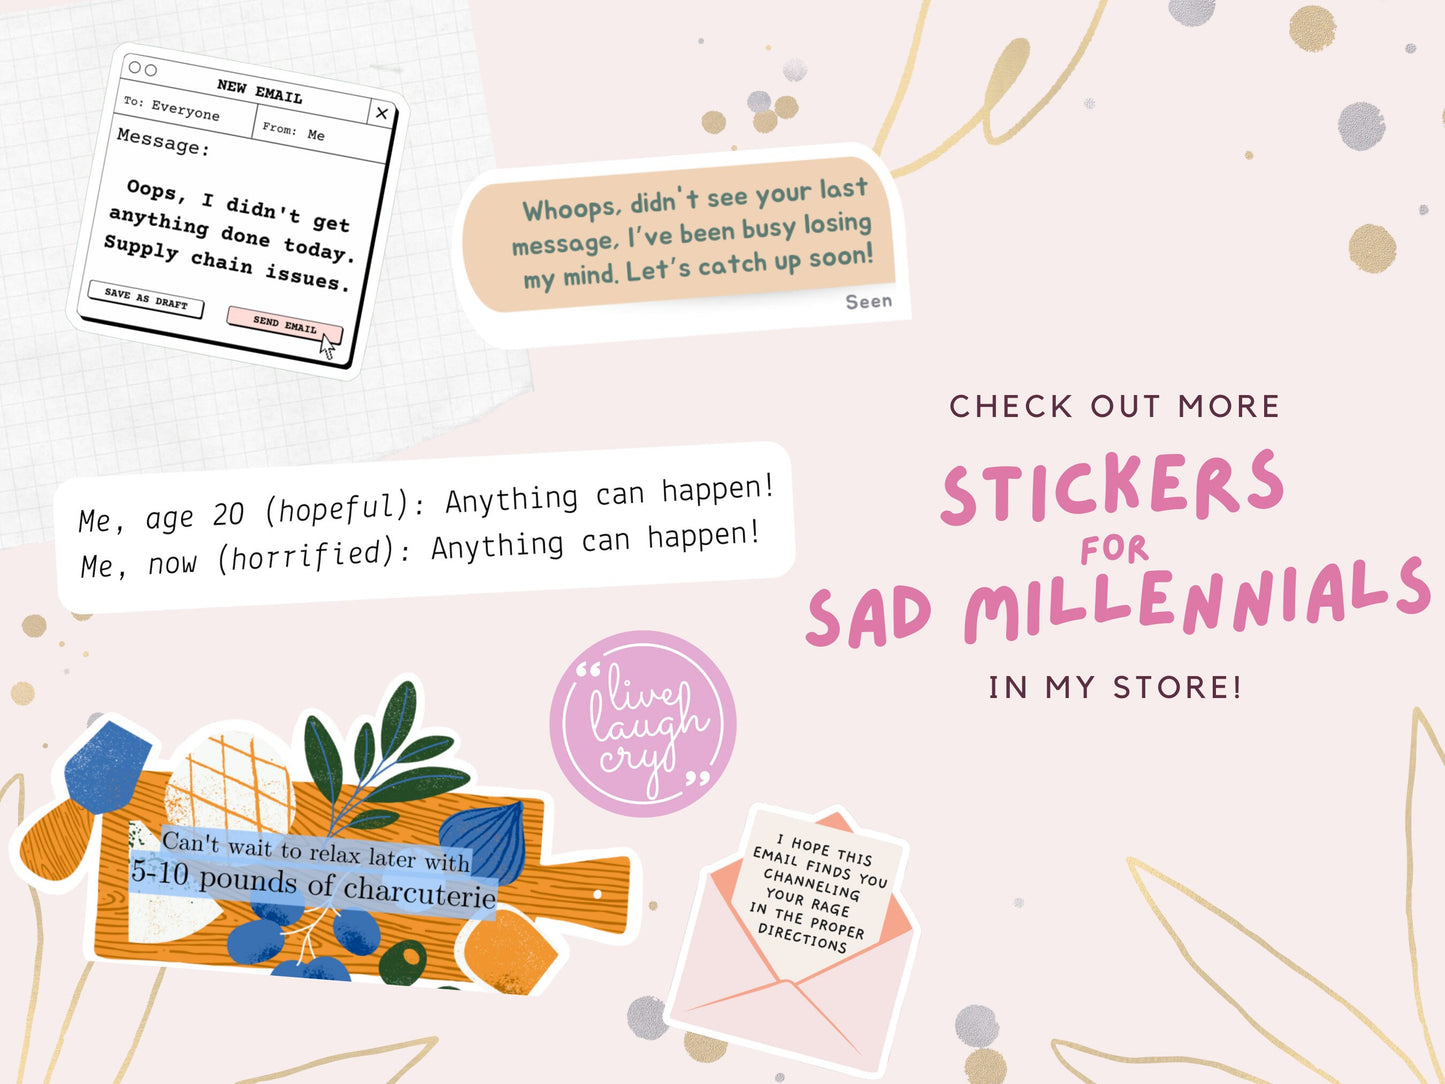 It's a Beautiful Day to be Mad Sticker | Sad Millennial Gifts | Funny Laptop Decals | Aesthetic Sticker